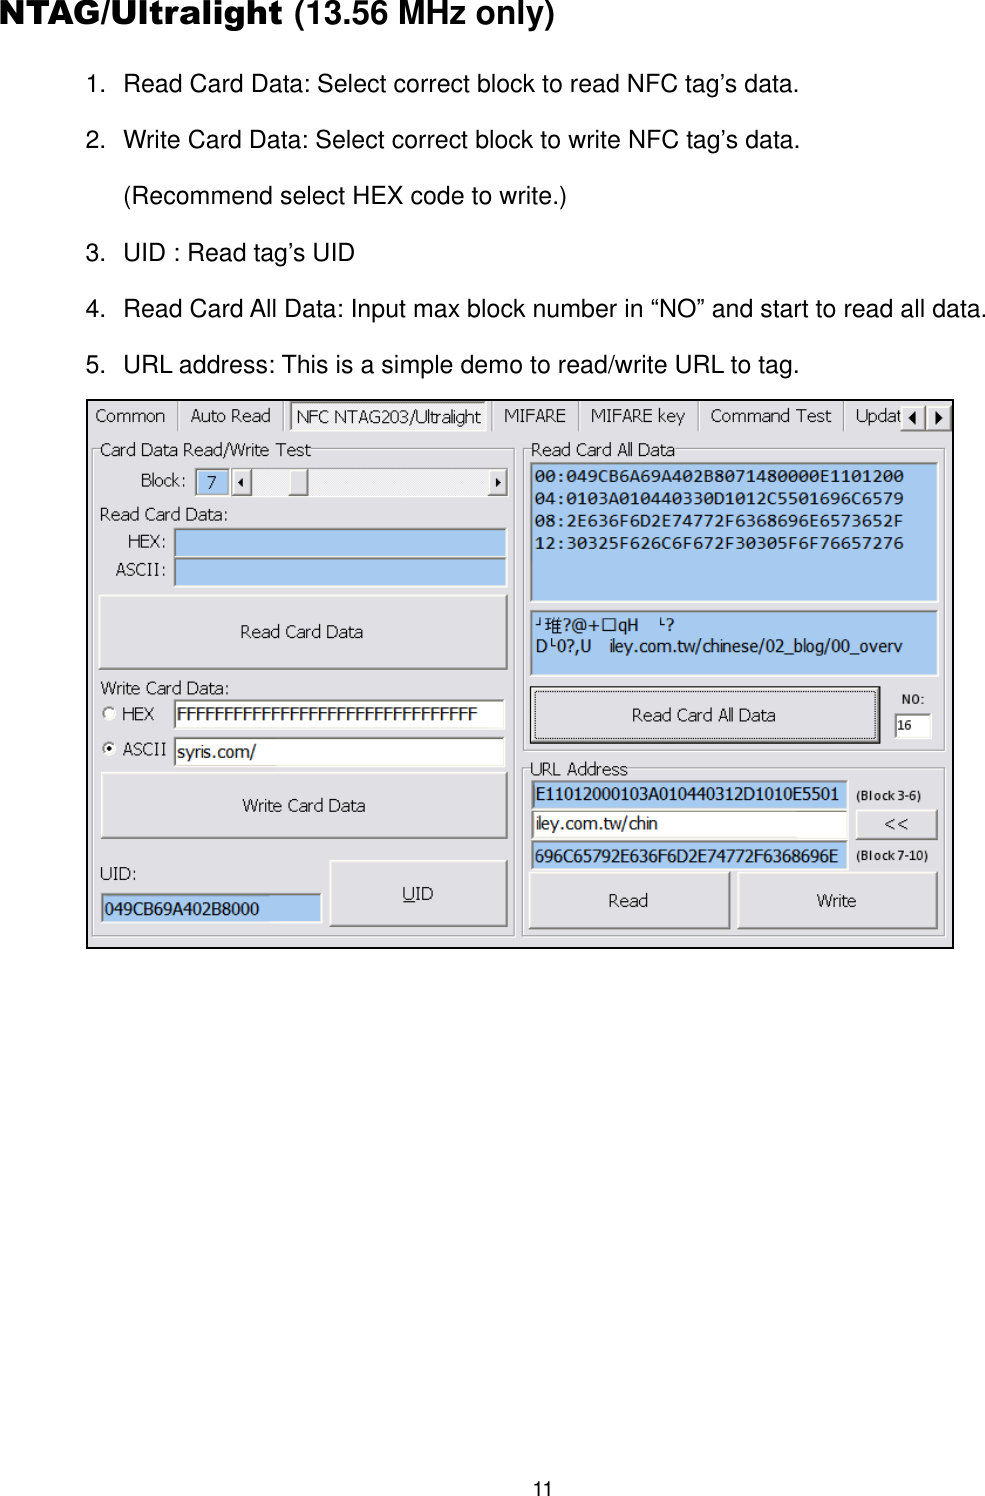 11  NTAG/Ultralight (13.56 MHz only) 1.  Read Card Data: Select correct block to read NFC tag’s data. 2.  Write Card Data: Select correct block to write NFC tag’s data. (Recommend select HEX code to write.) 3.  UID : Read tag’s UID 4.  Read Card All Data: Input max block number in “NO” and start to read all data. 5.  URL address: This is a simple demo to read/write URL to tag.     